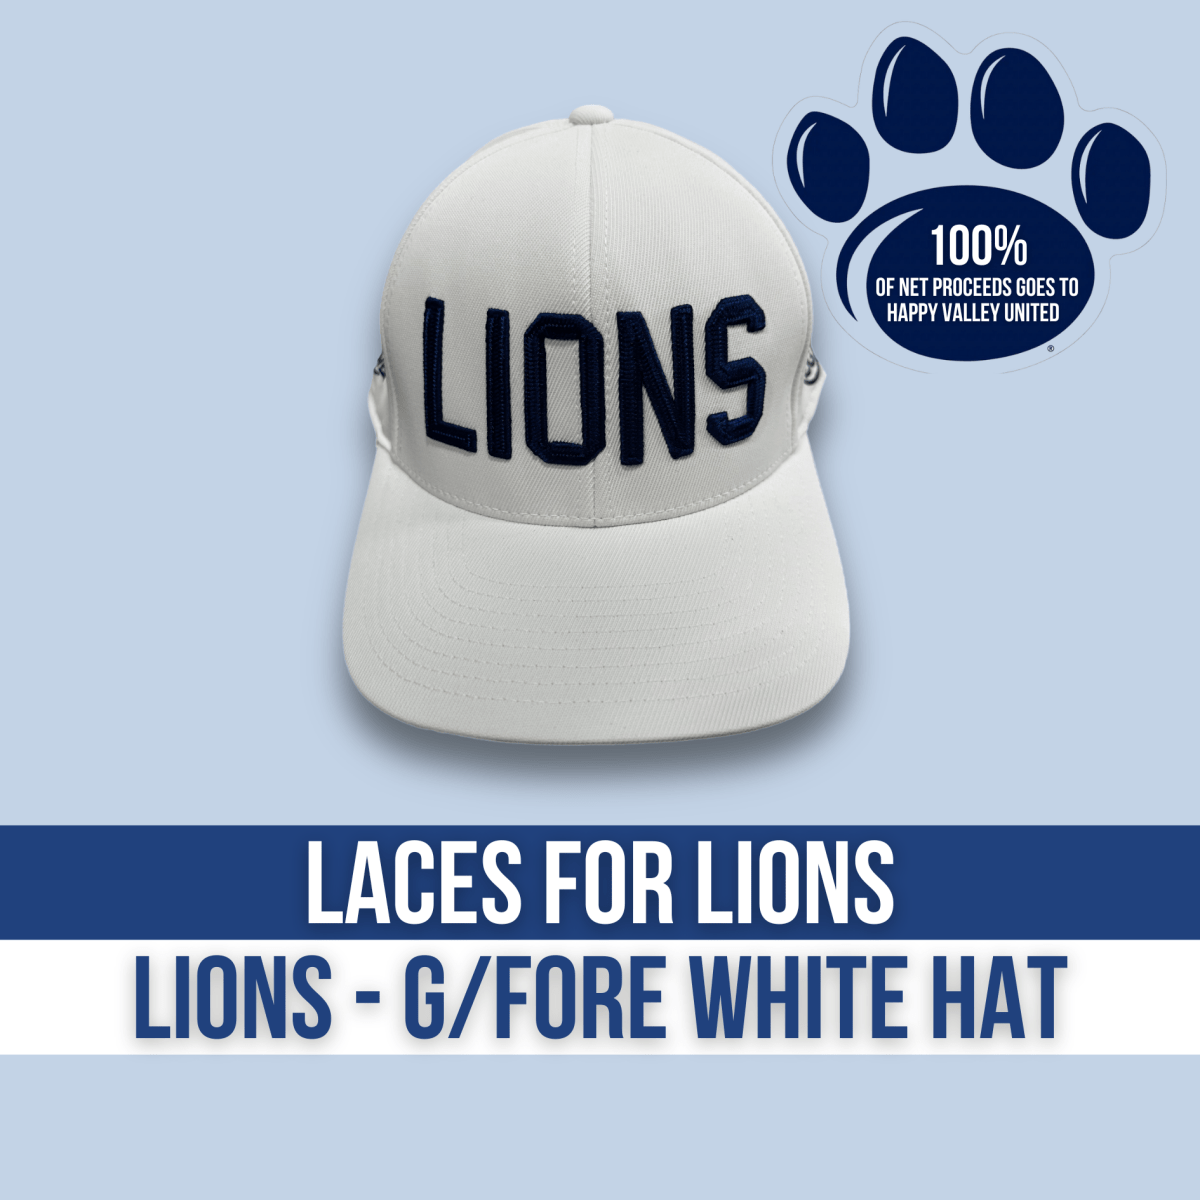 Laces for Lions White "LIONS" Happy Valley United G/FORE 110 Hat - Hats - Jawns on Fire Sneakers & Streetwear